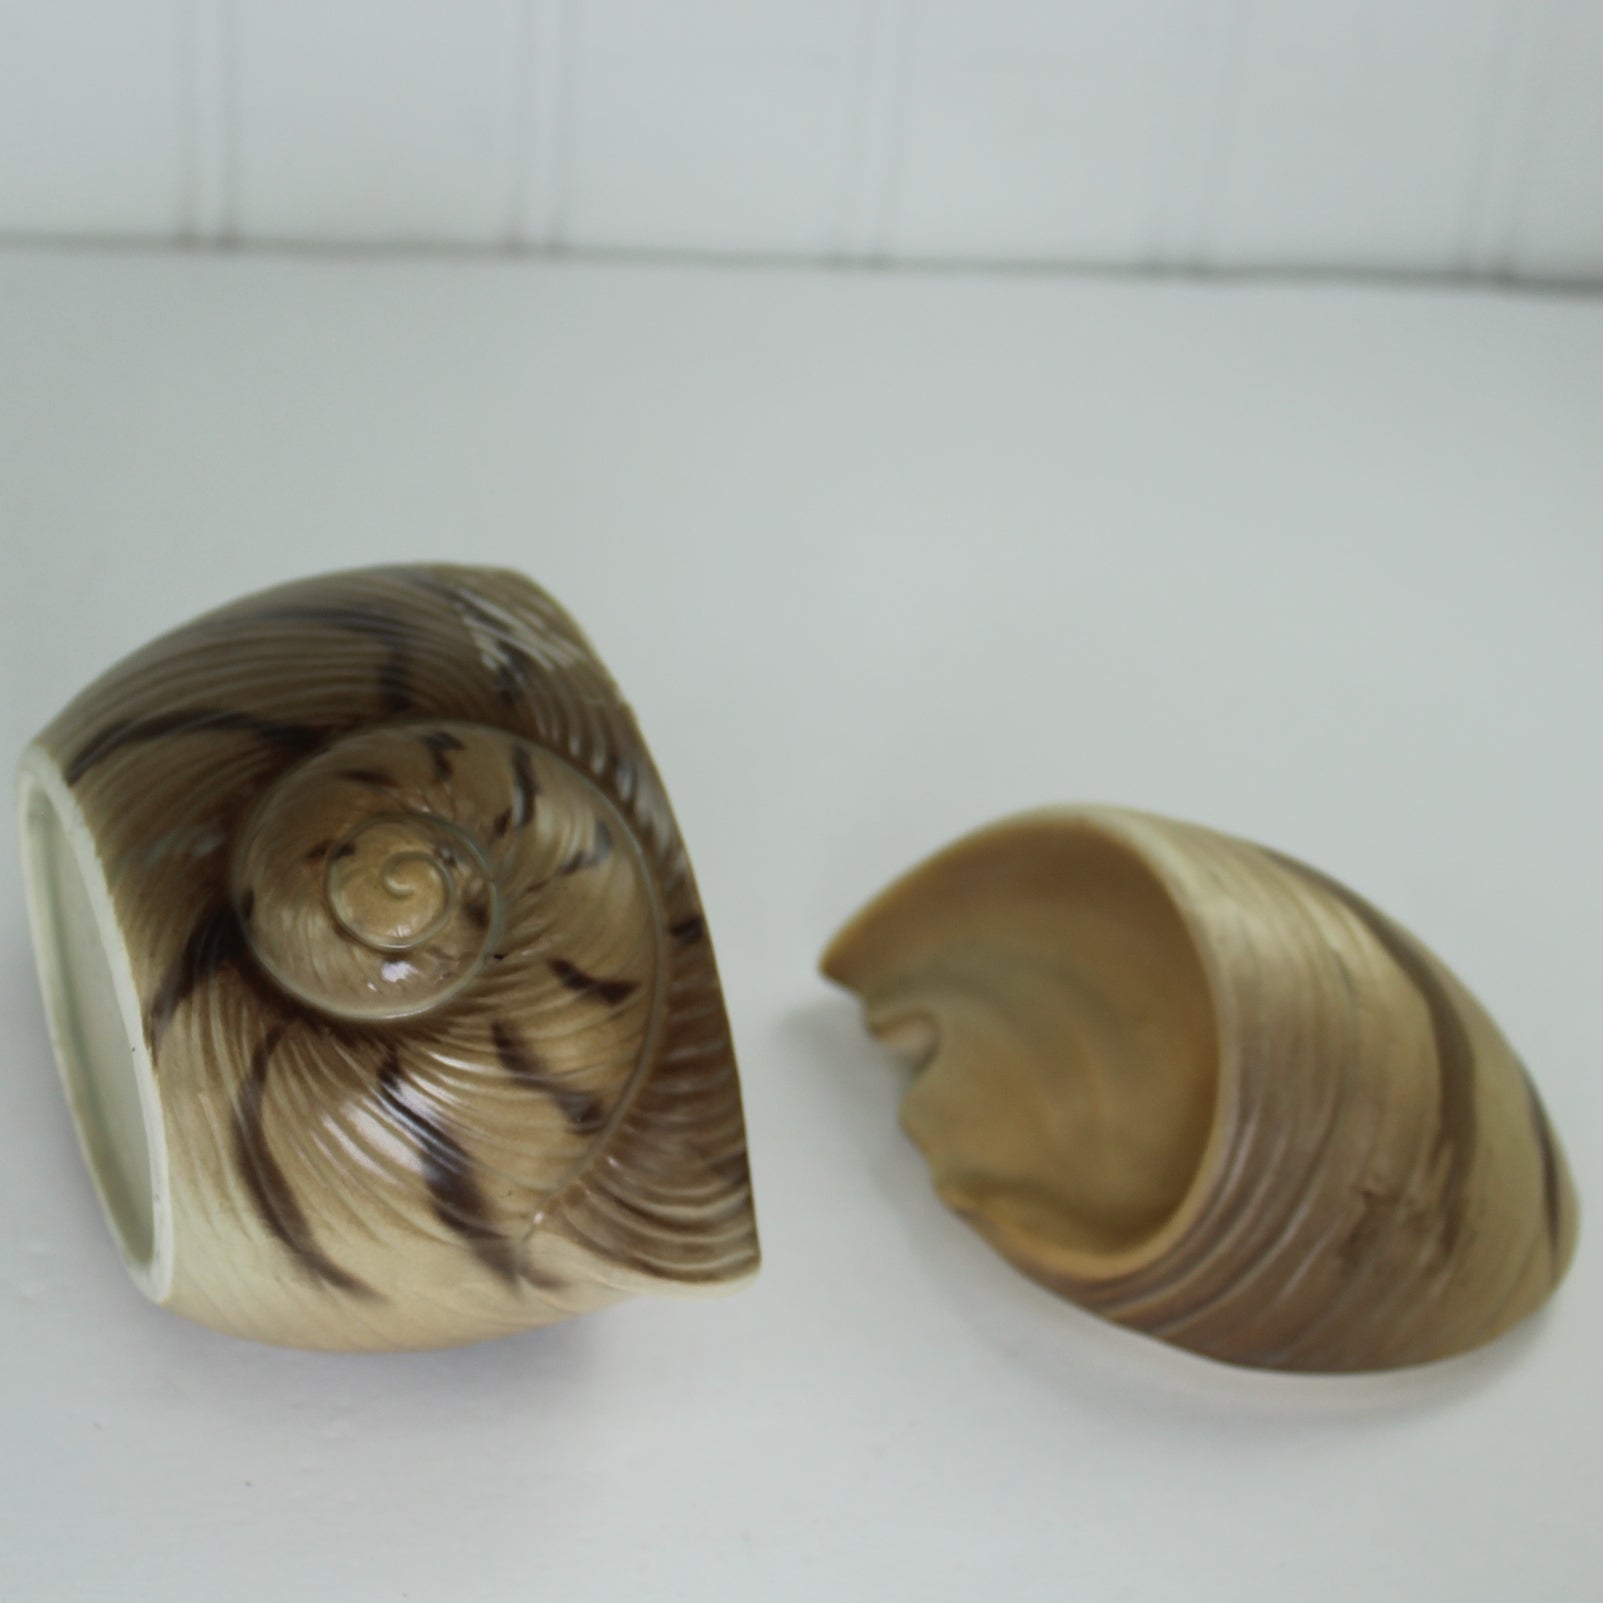 Unique Shell Shape Small Lidded Dish Otagiri 1982 Really Sweet Different view front and lid top